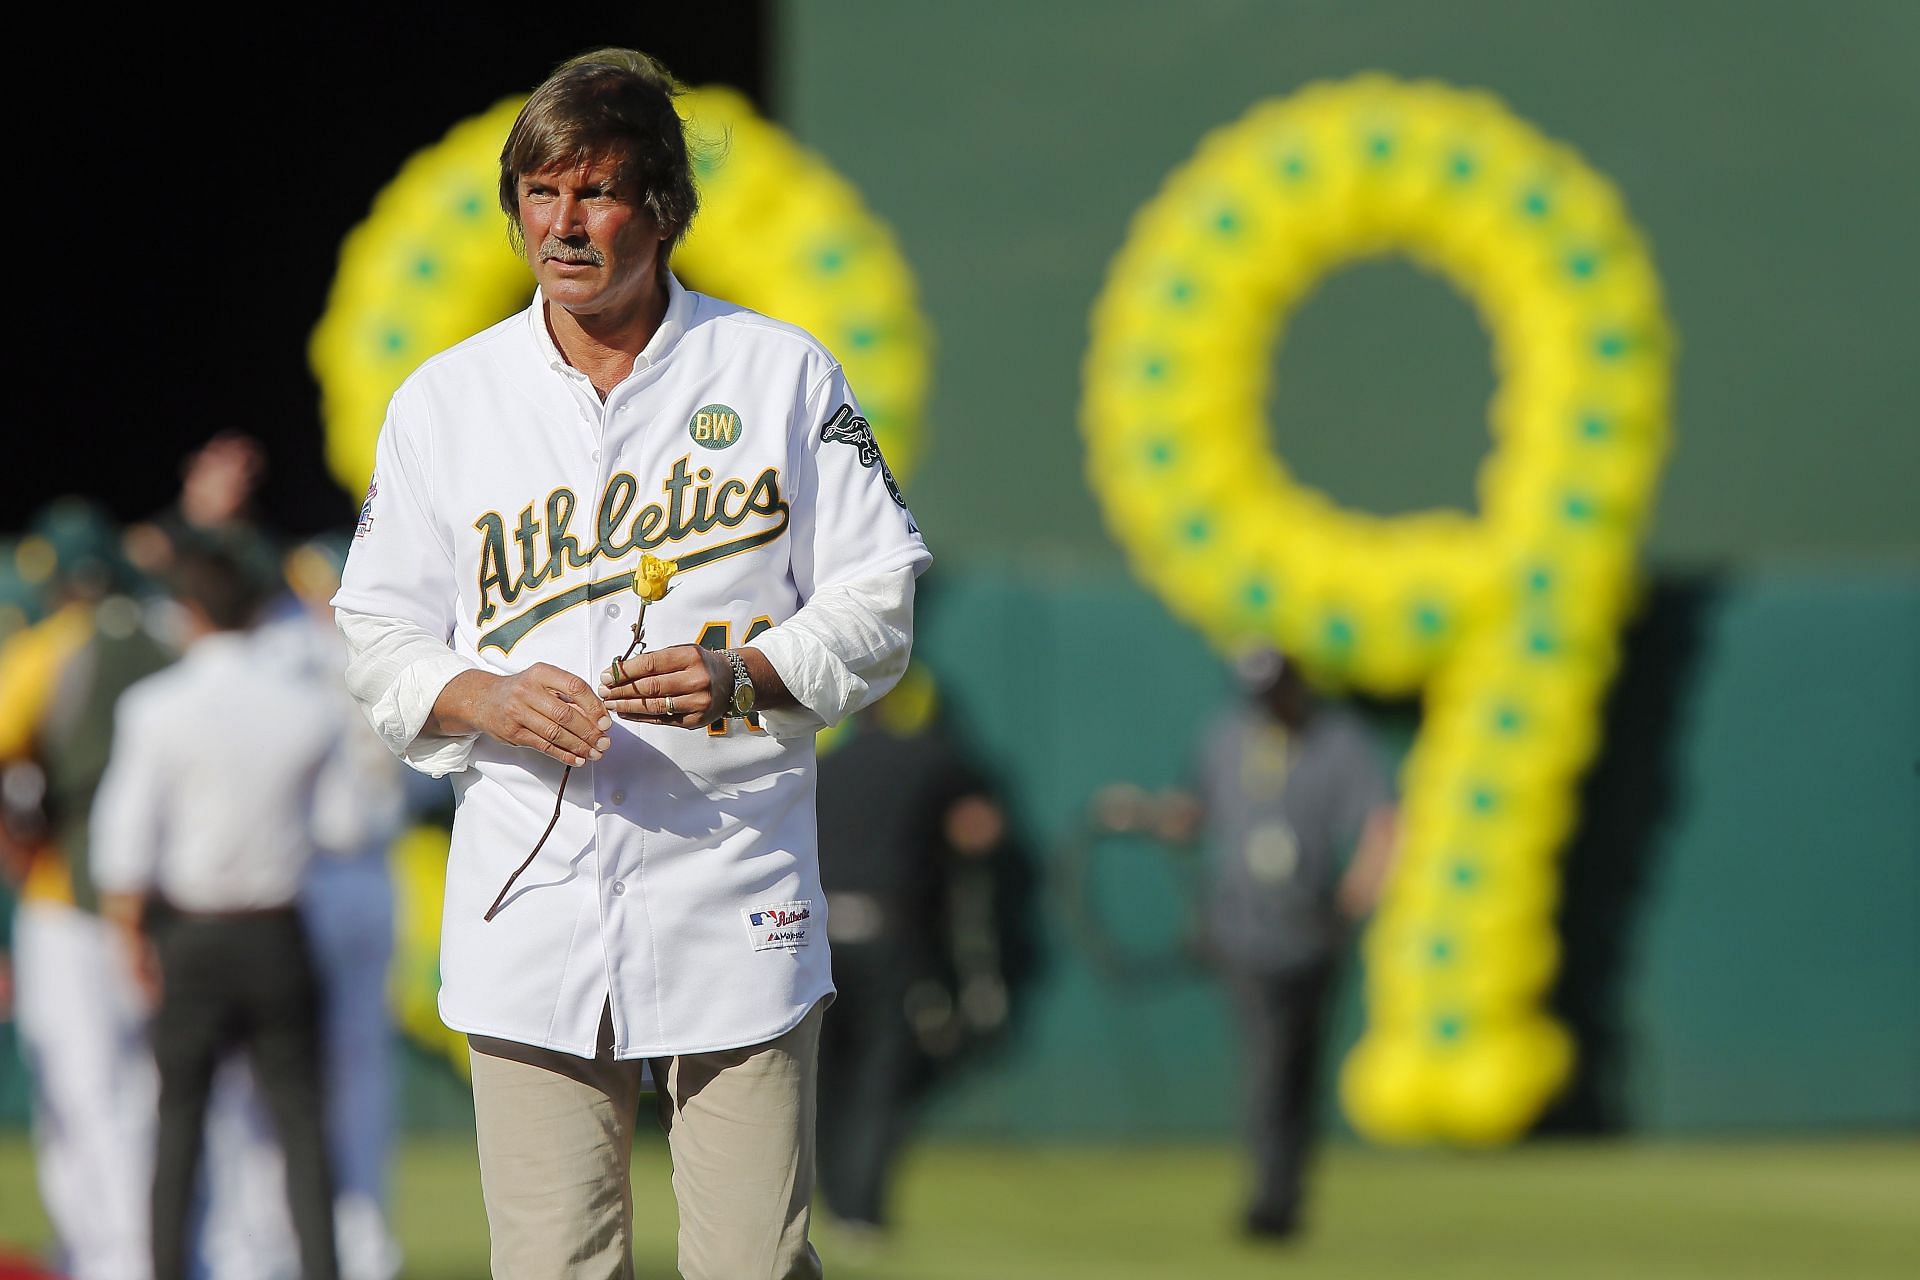 Dennis Eckersley played for the Athletics and Cubs